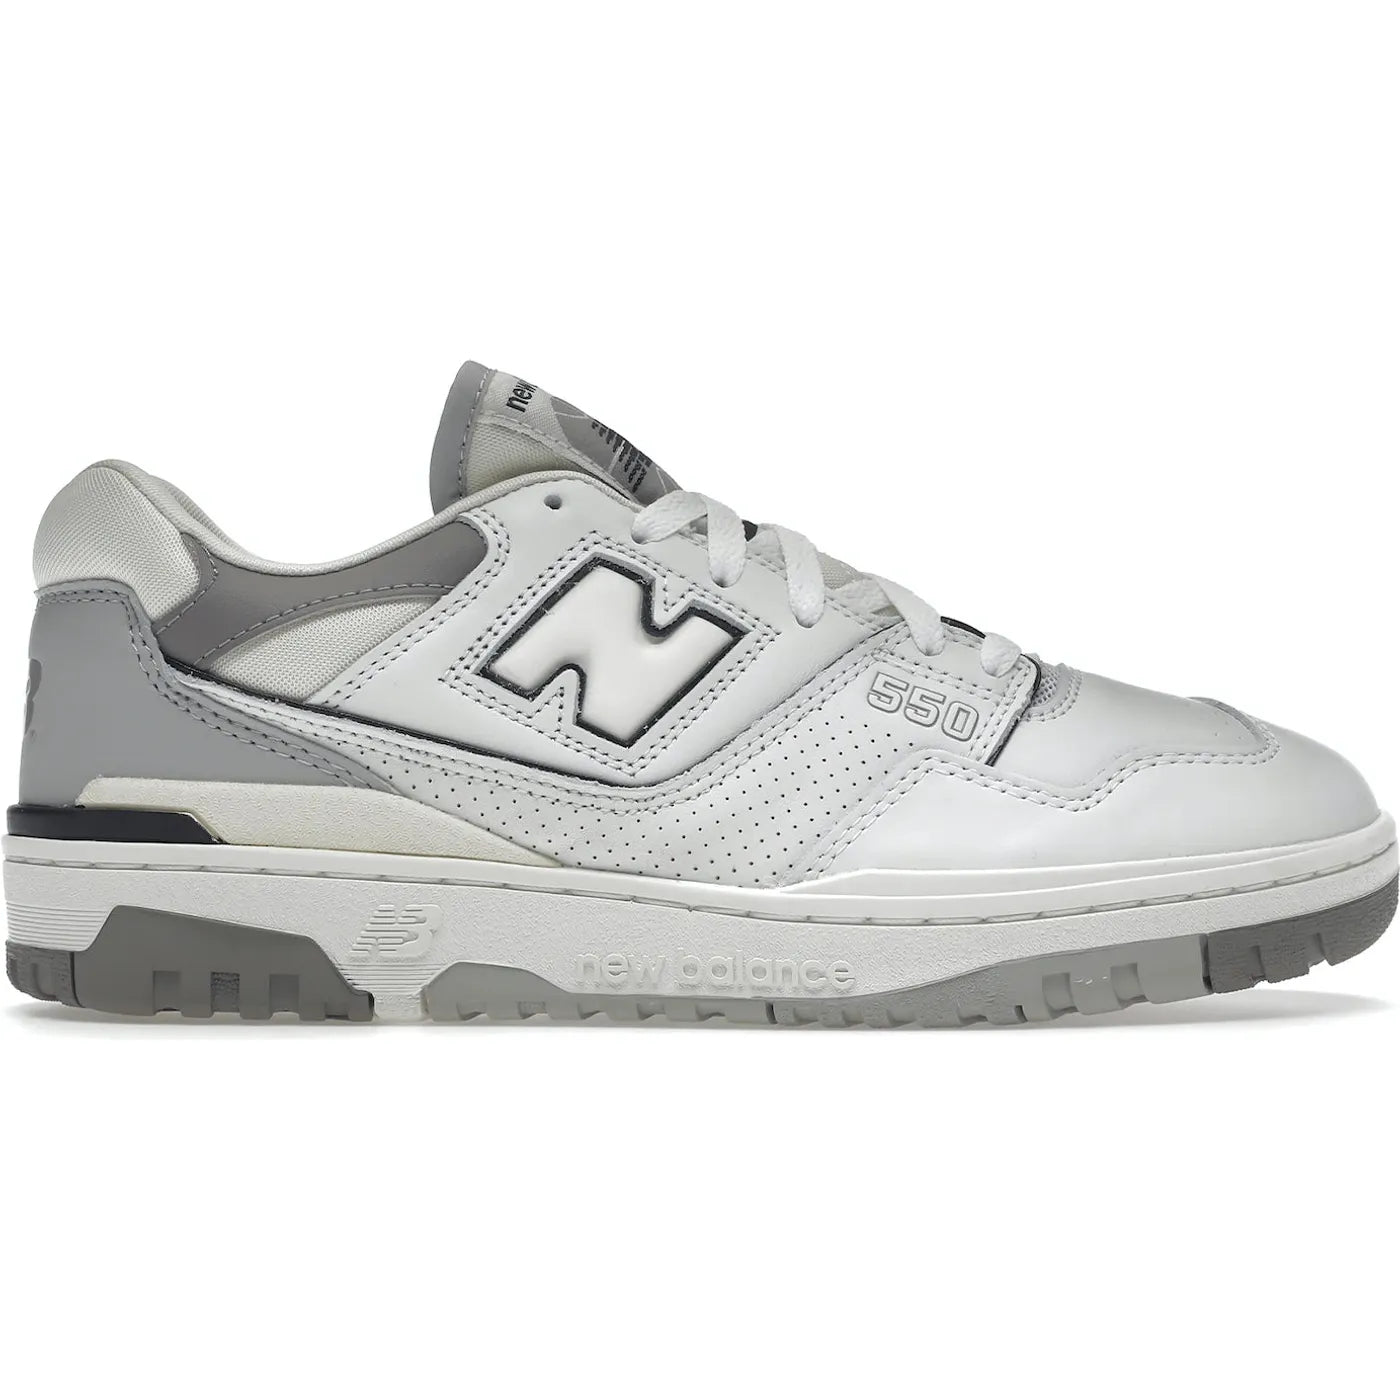 New Balance 550 Salt and Pepper – Soleply